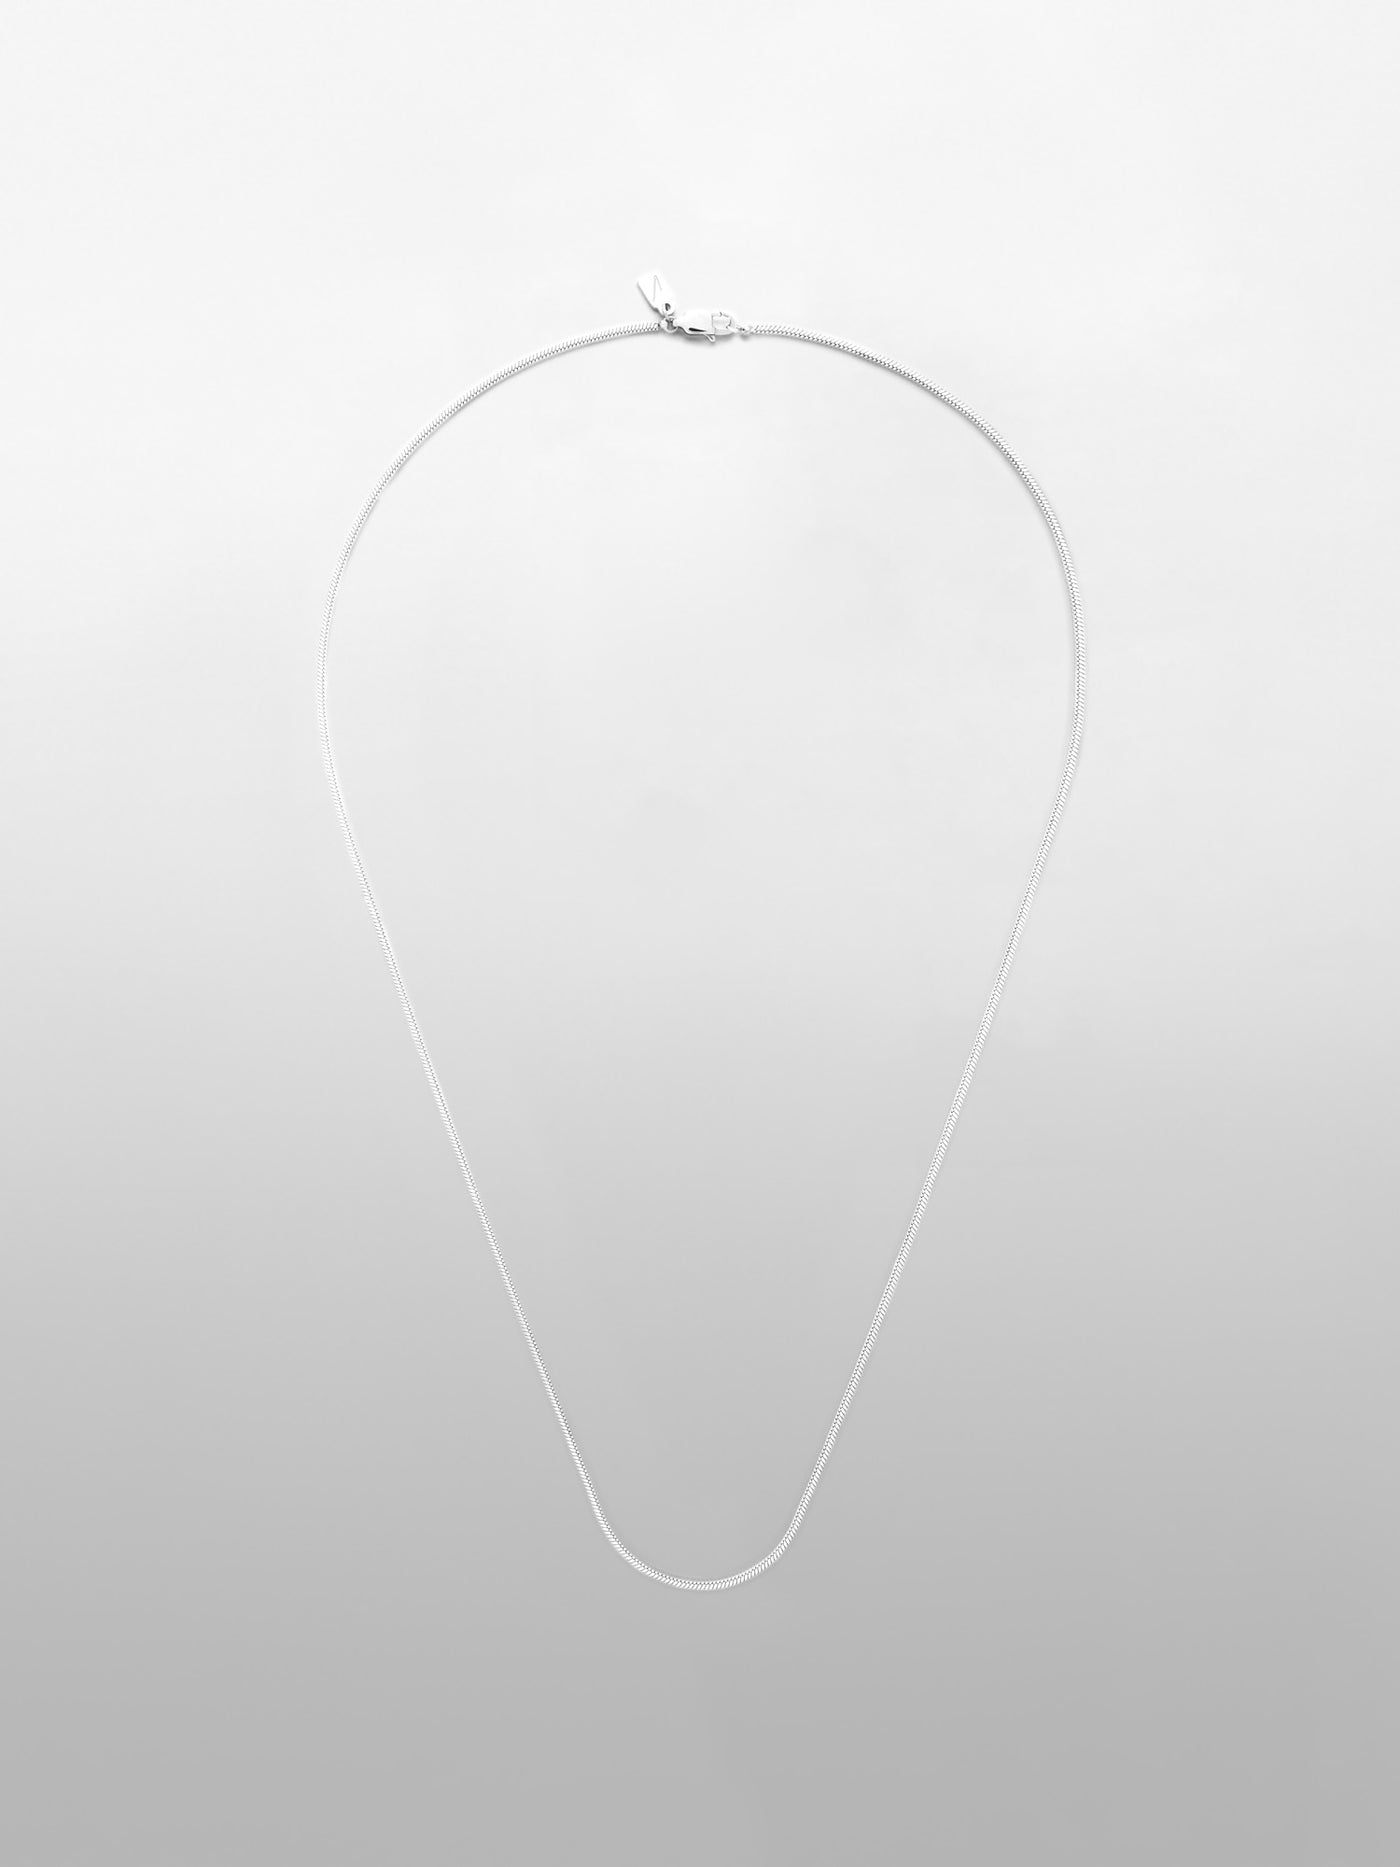 The Square Chain Link Necklace – Yearly Company